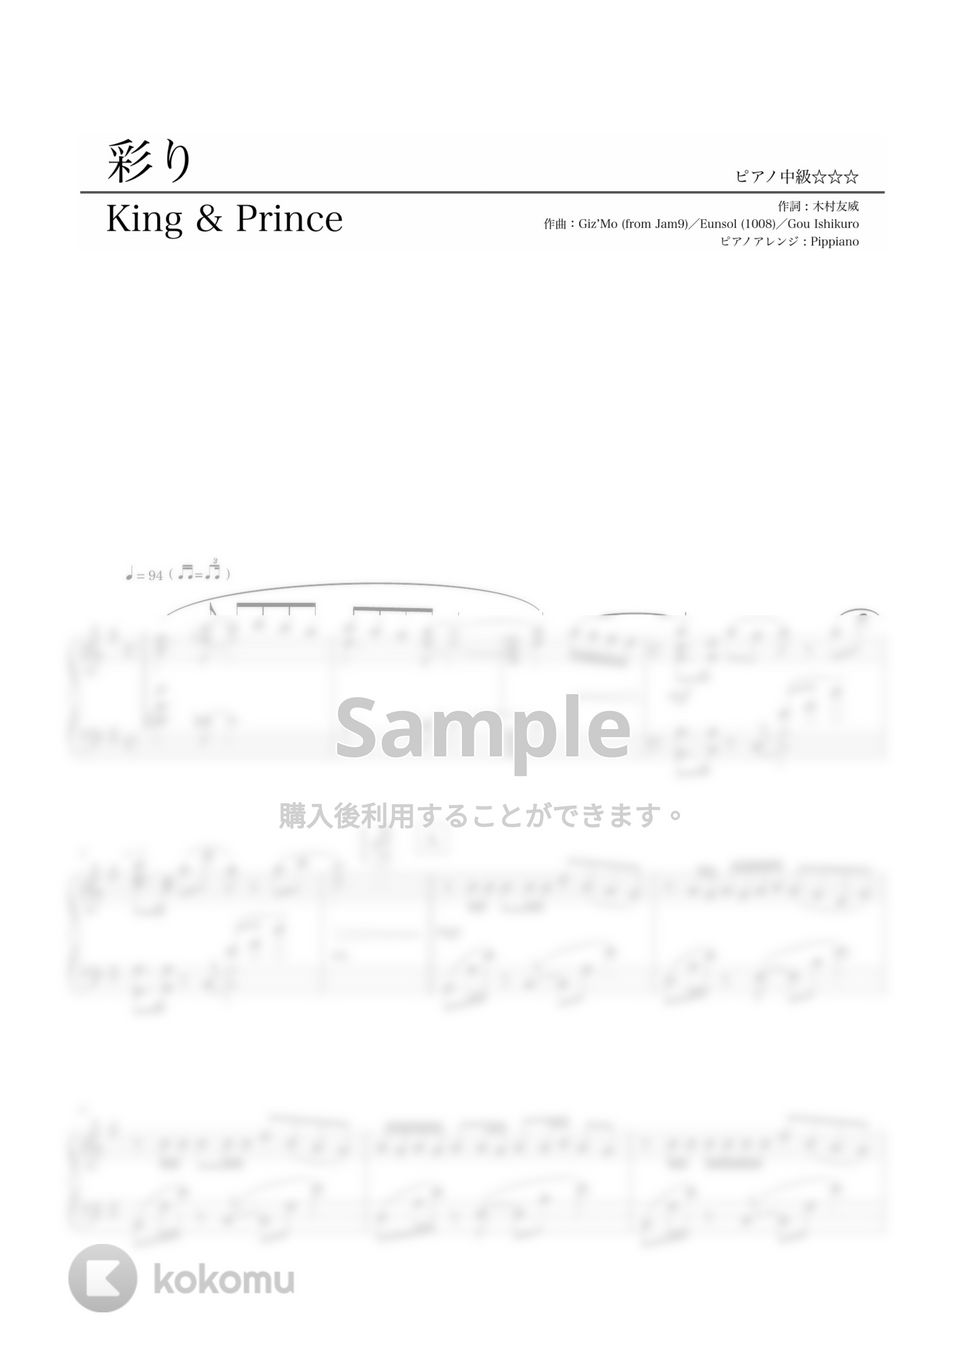 King & Prince - 彩り by Pippiano